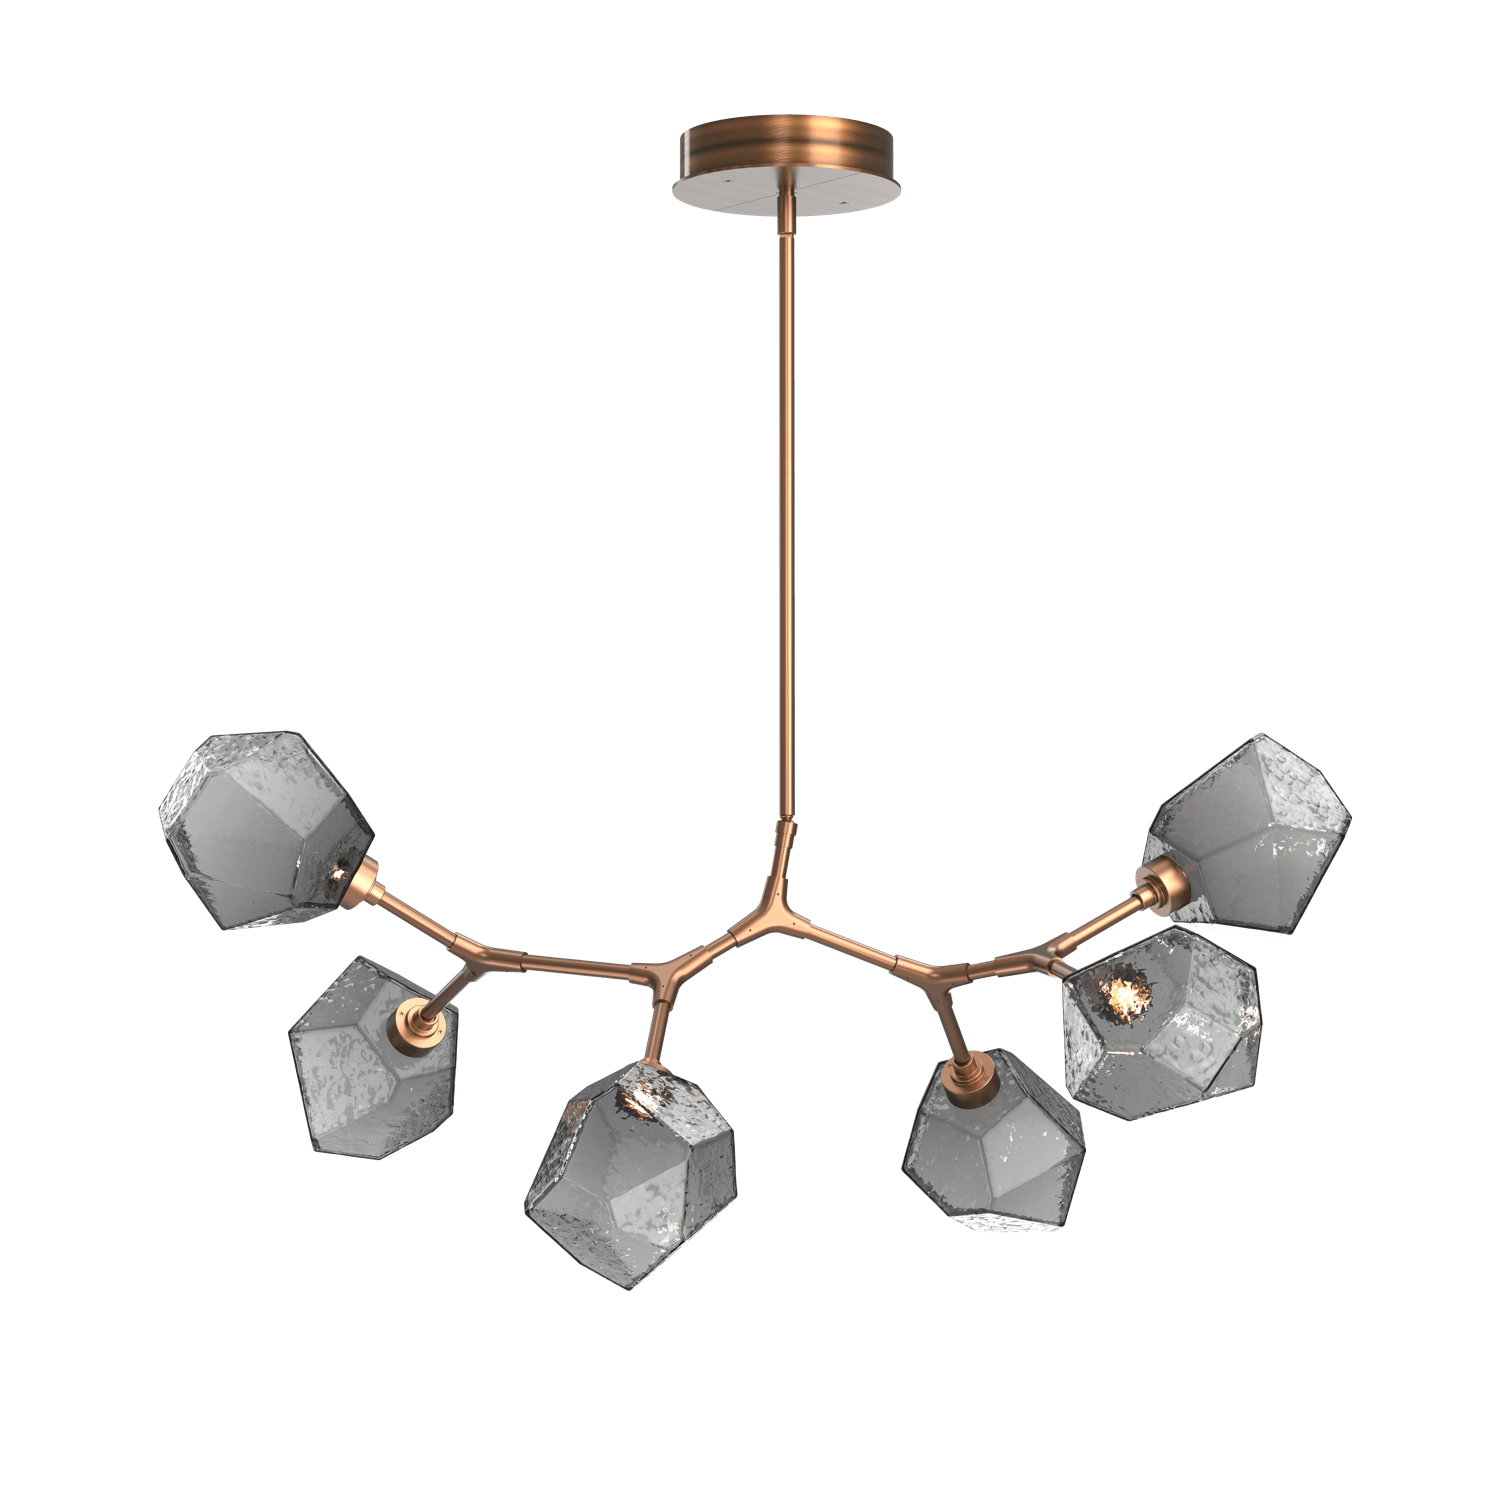 PLB0039-BA-RB-S-Hammerton-Studio-Gem-6-light-modern-branch-chandelier-with-oil-rubbed-bronze-finish-and-smoke-blown-glass-shades-and-LED-lamping